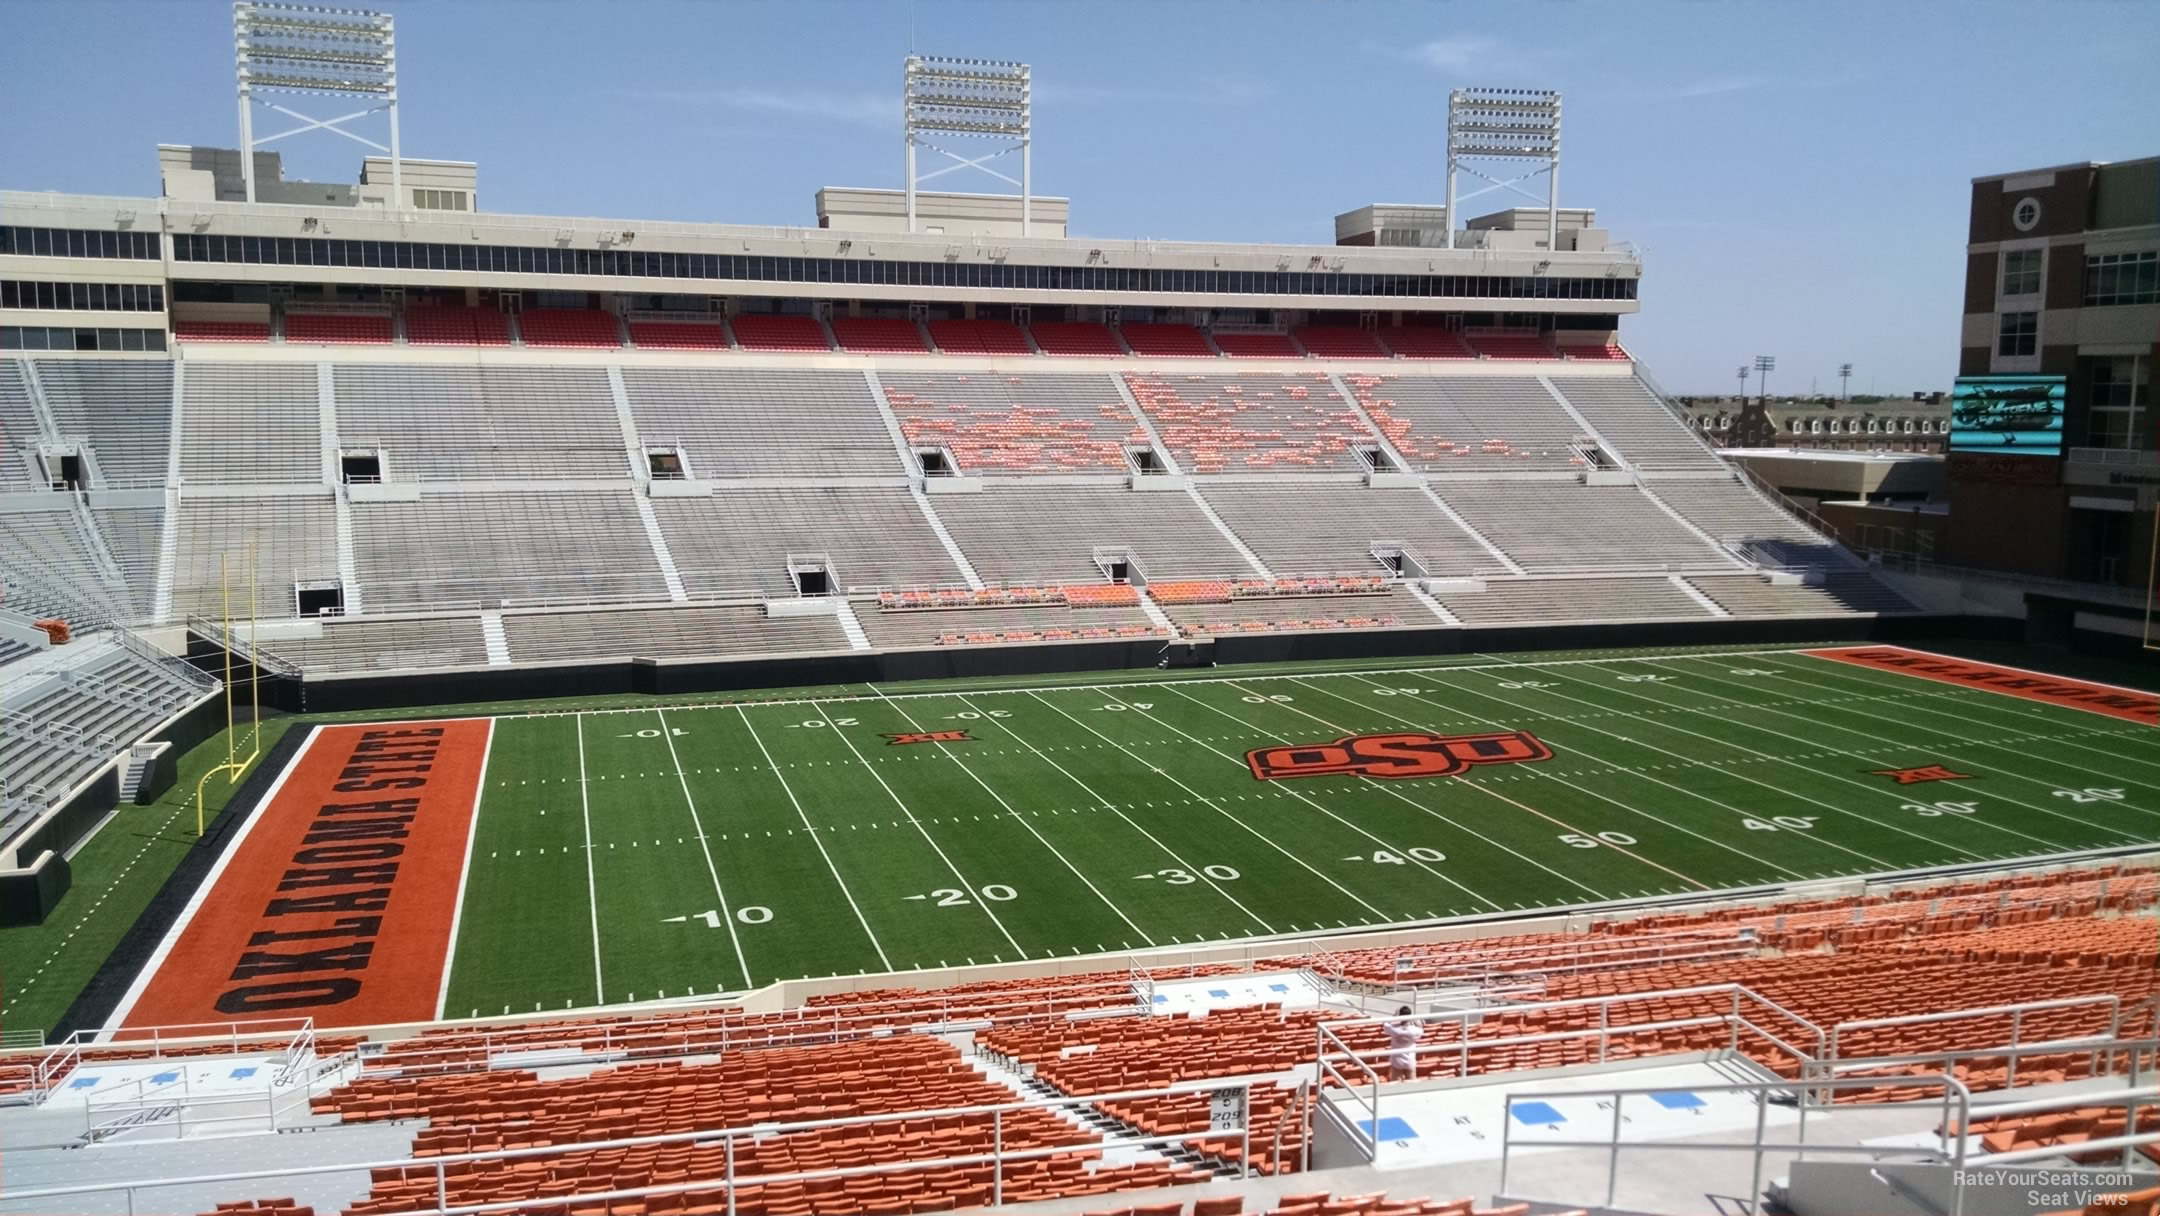 section 309, row 19 seat view  - boone pickens stadium